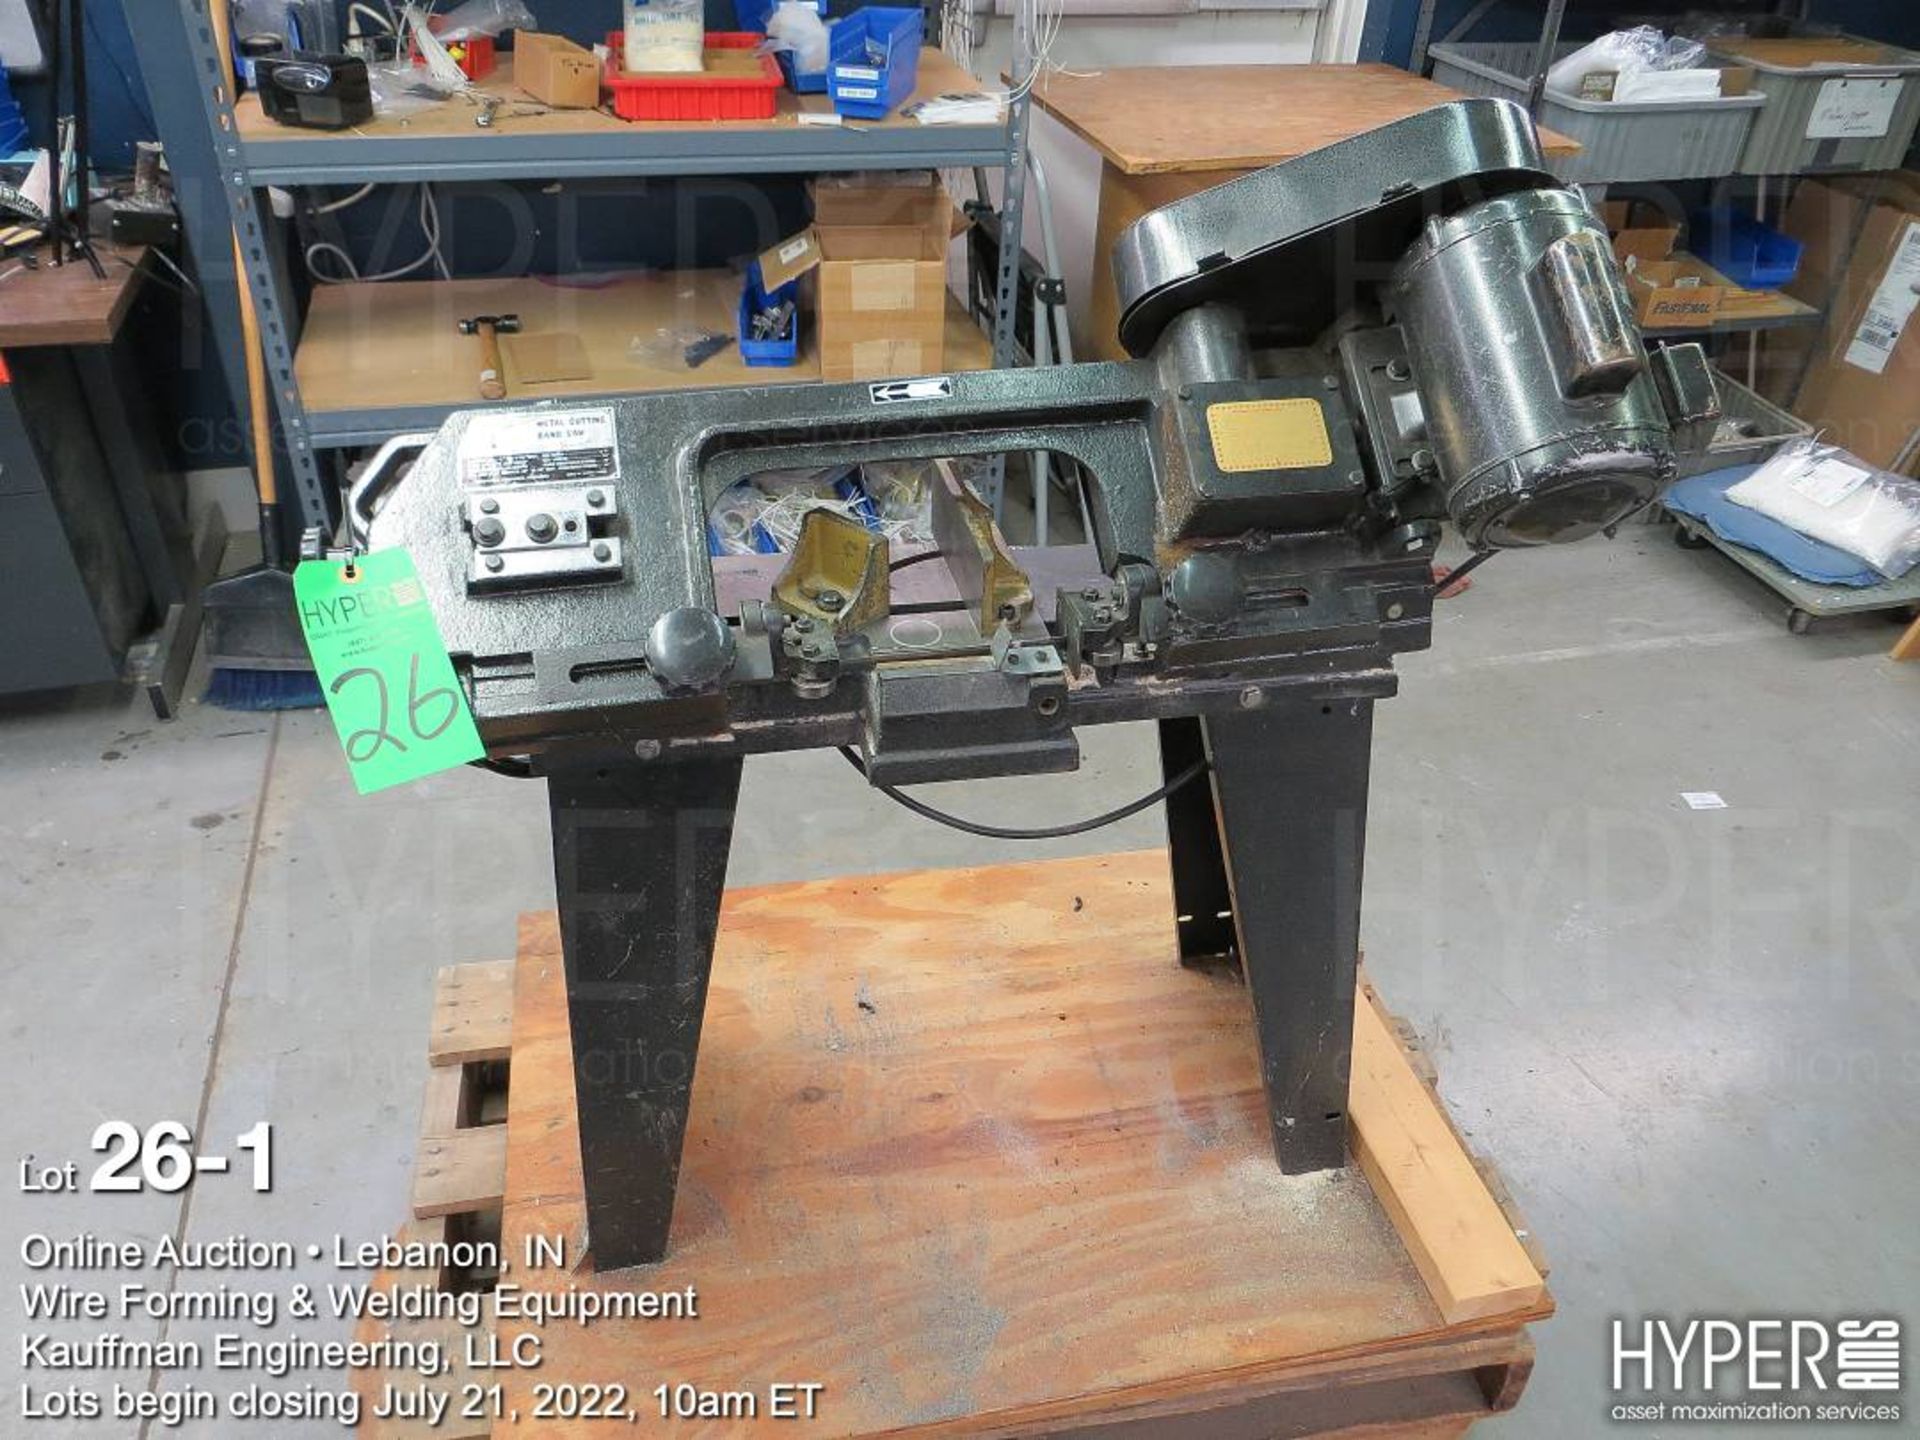 Master Service HVMBS-4.5 Band Saw